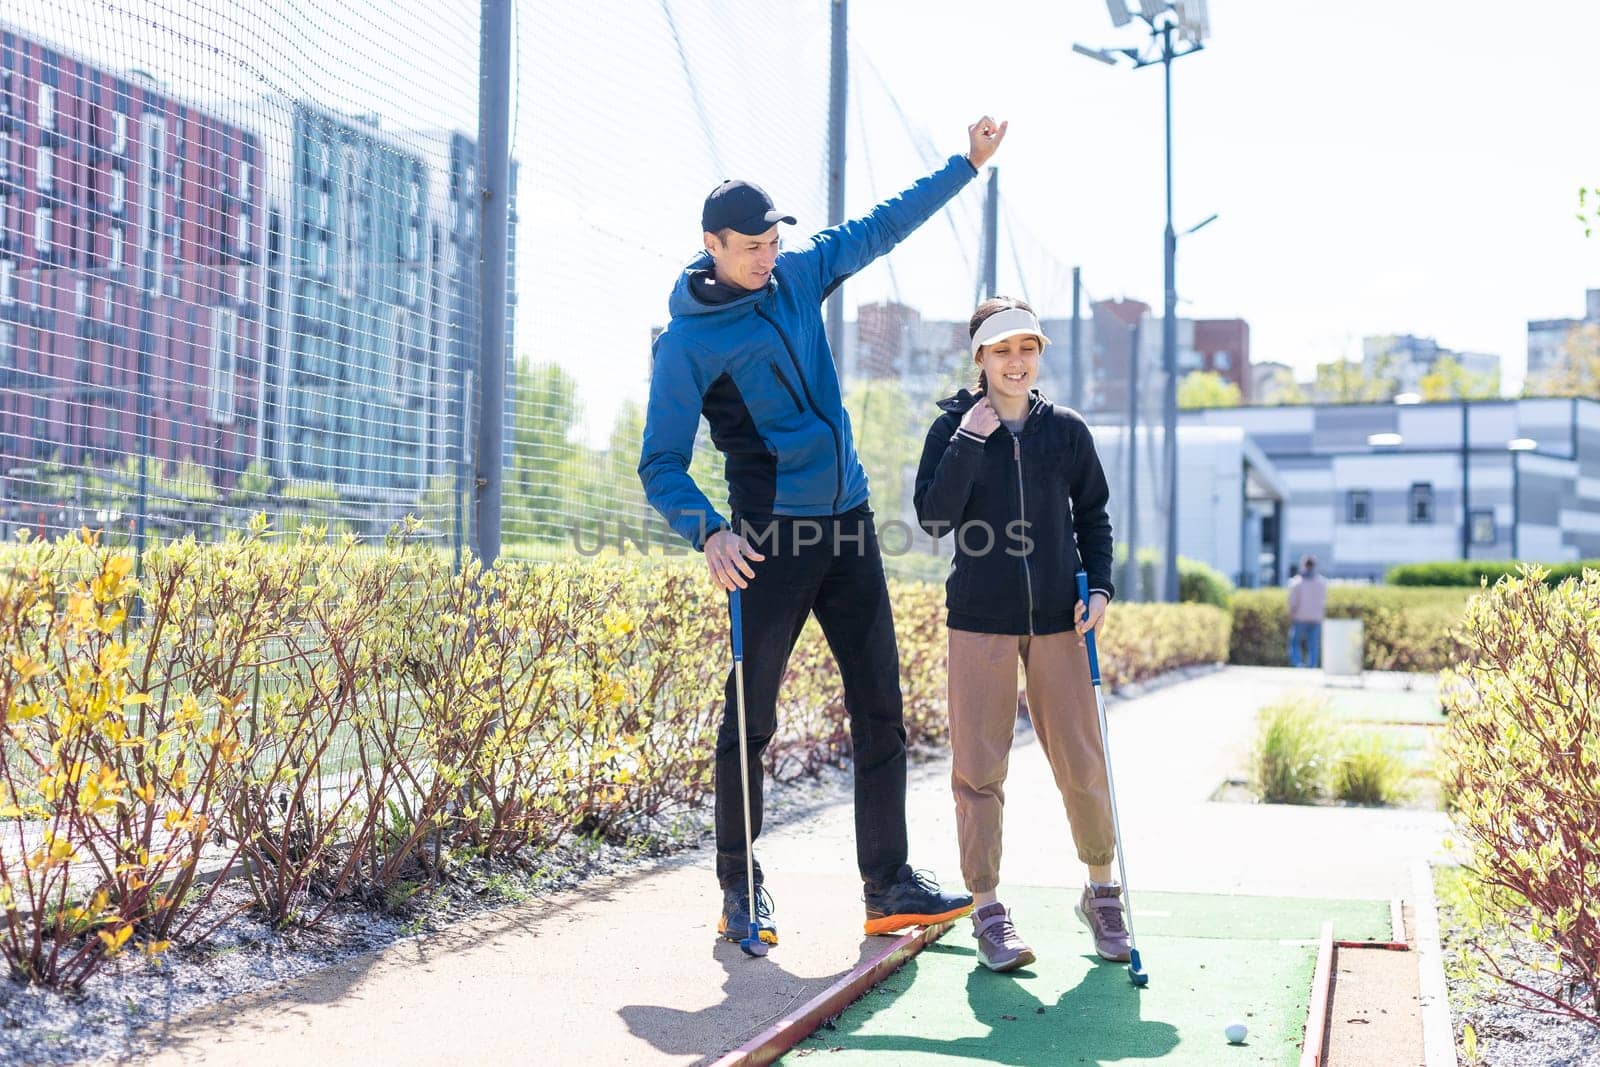 The girl is preparing to hit the ball with a golf club and looks at the man who is squatting next to her with the golf club in his hands. by Andelov13